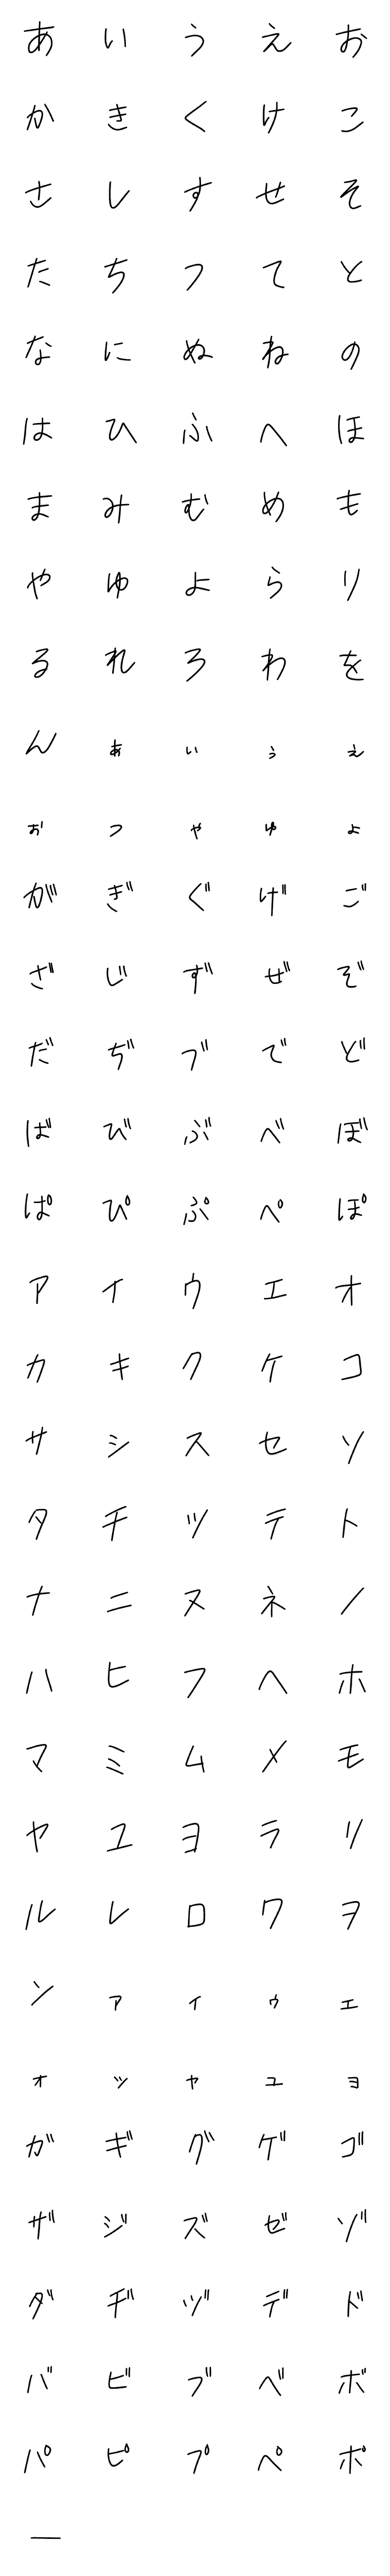 [LINE絵文字]23才の文字の画像一覧